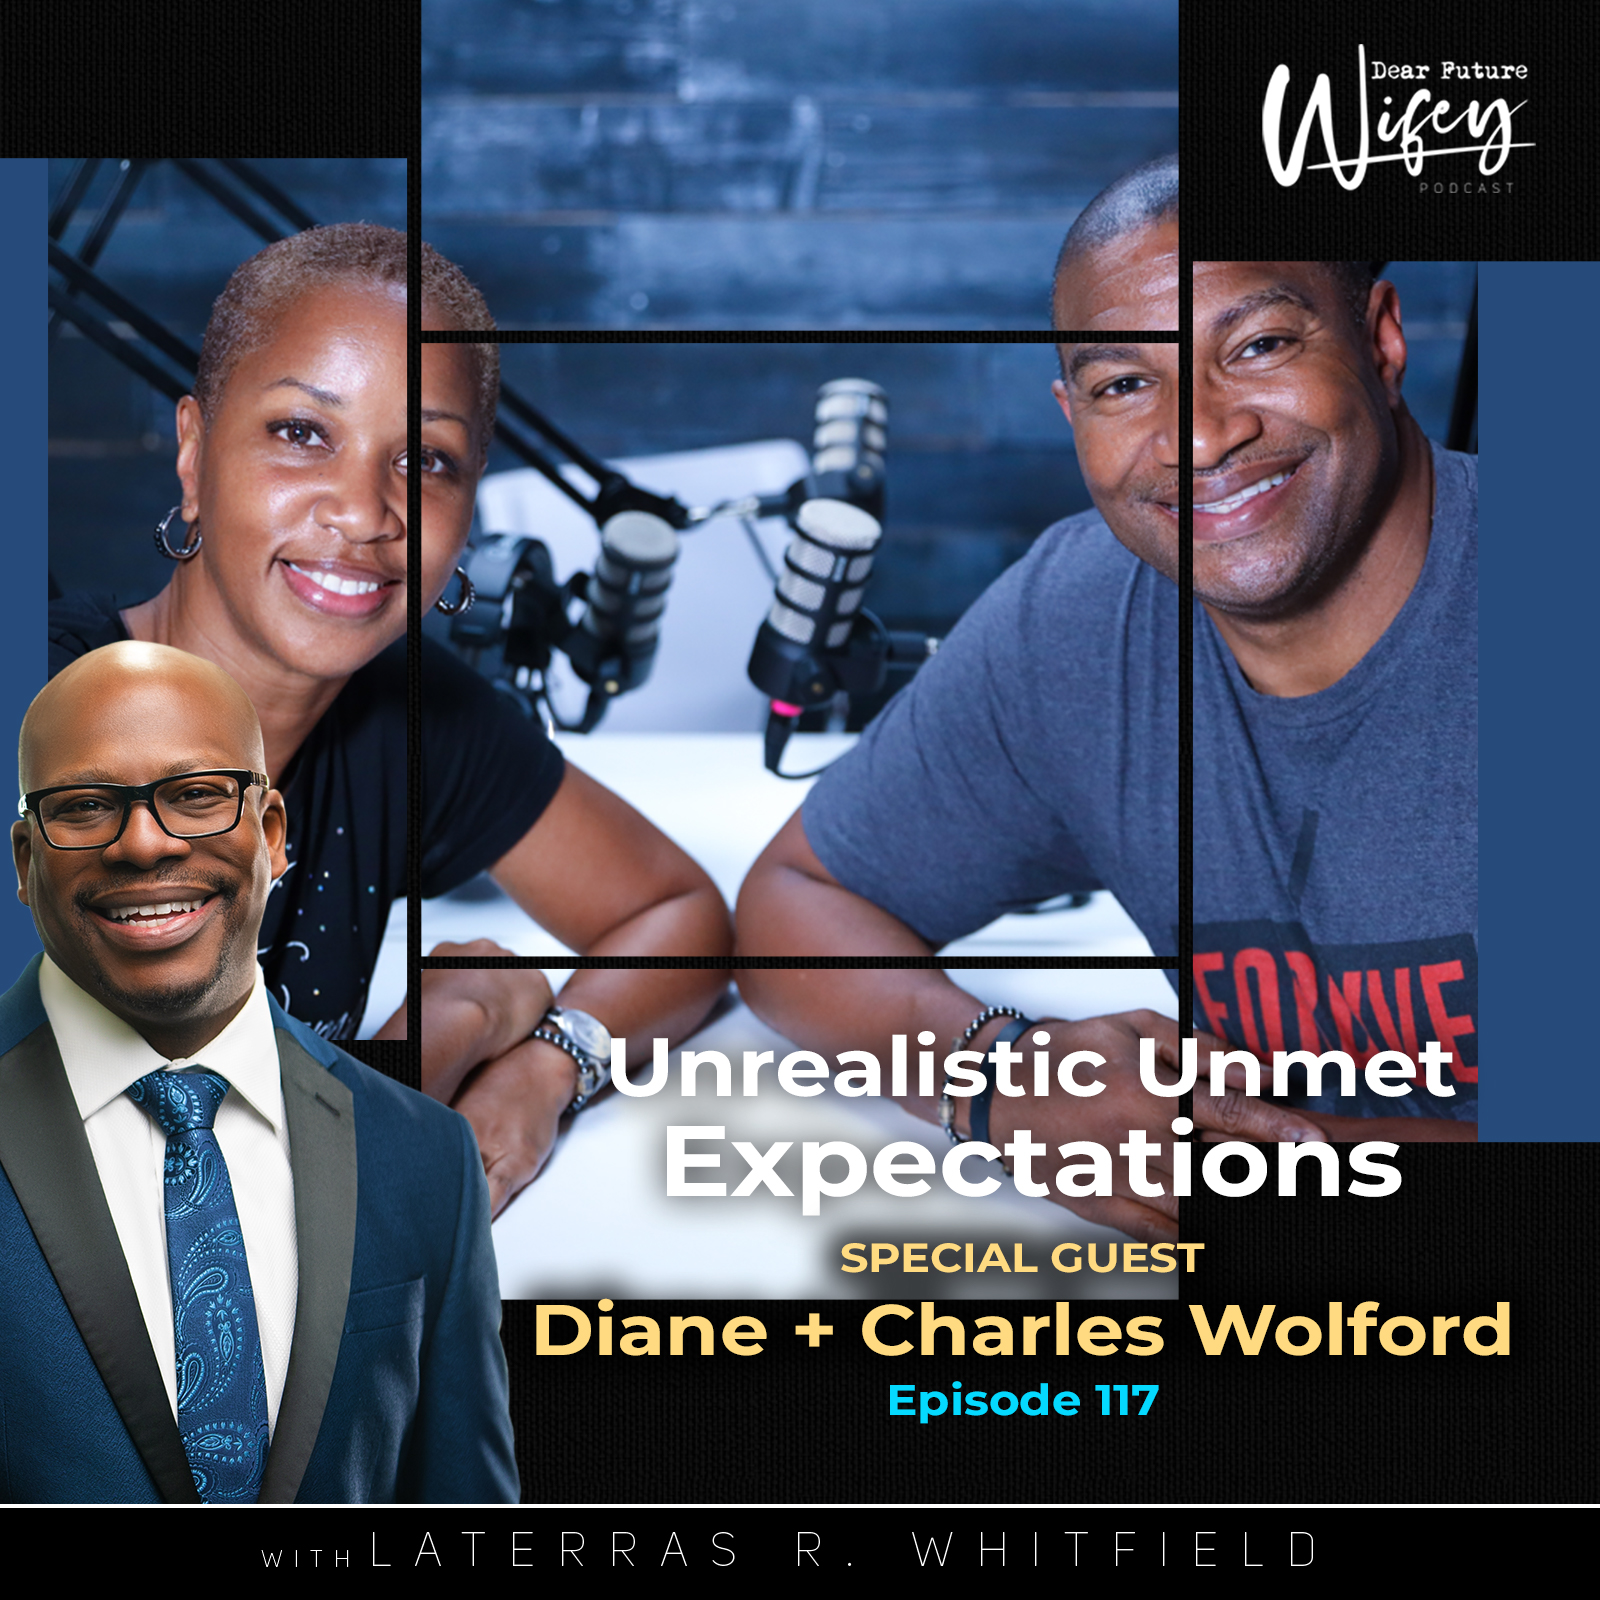 Unrealistic Unmet Expectations (Guests: Diane & Charles Wolford)